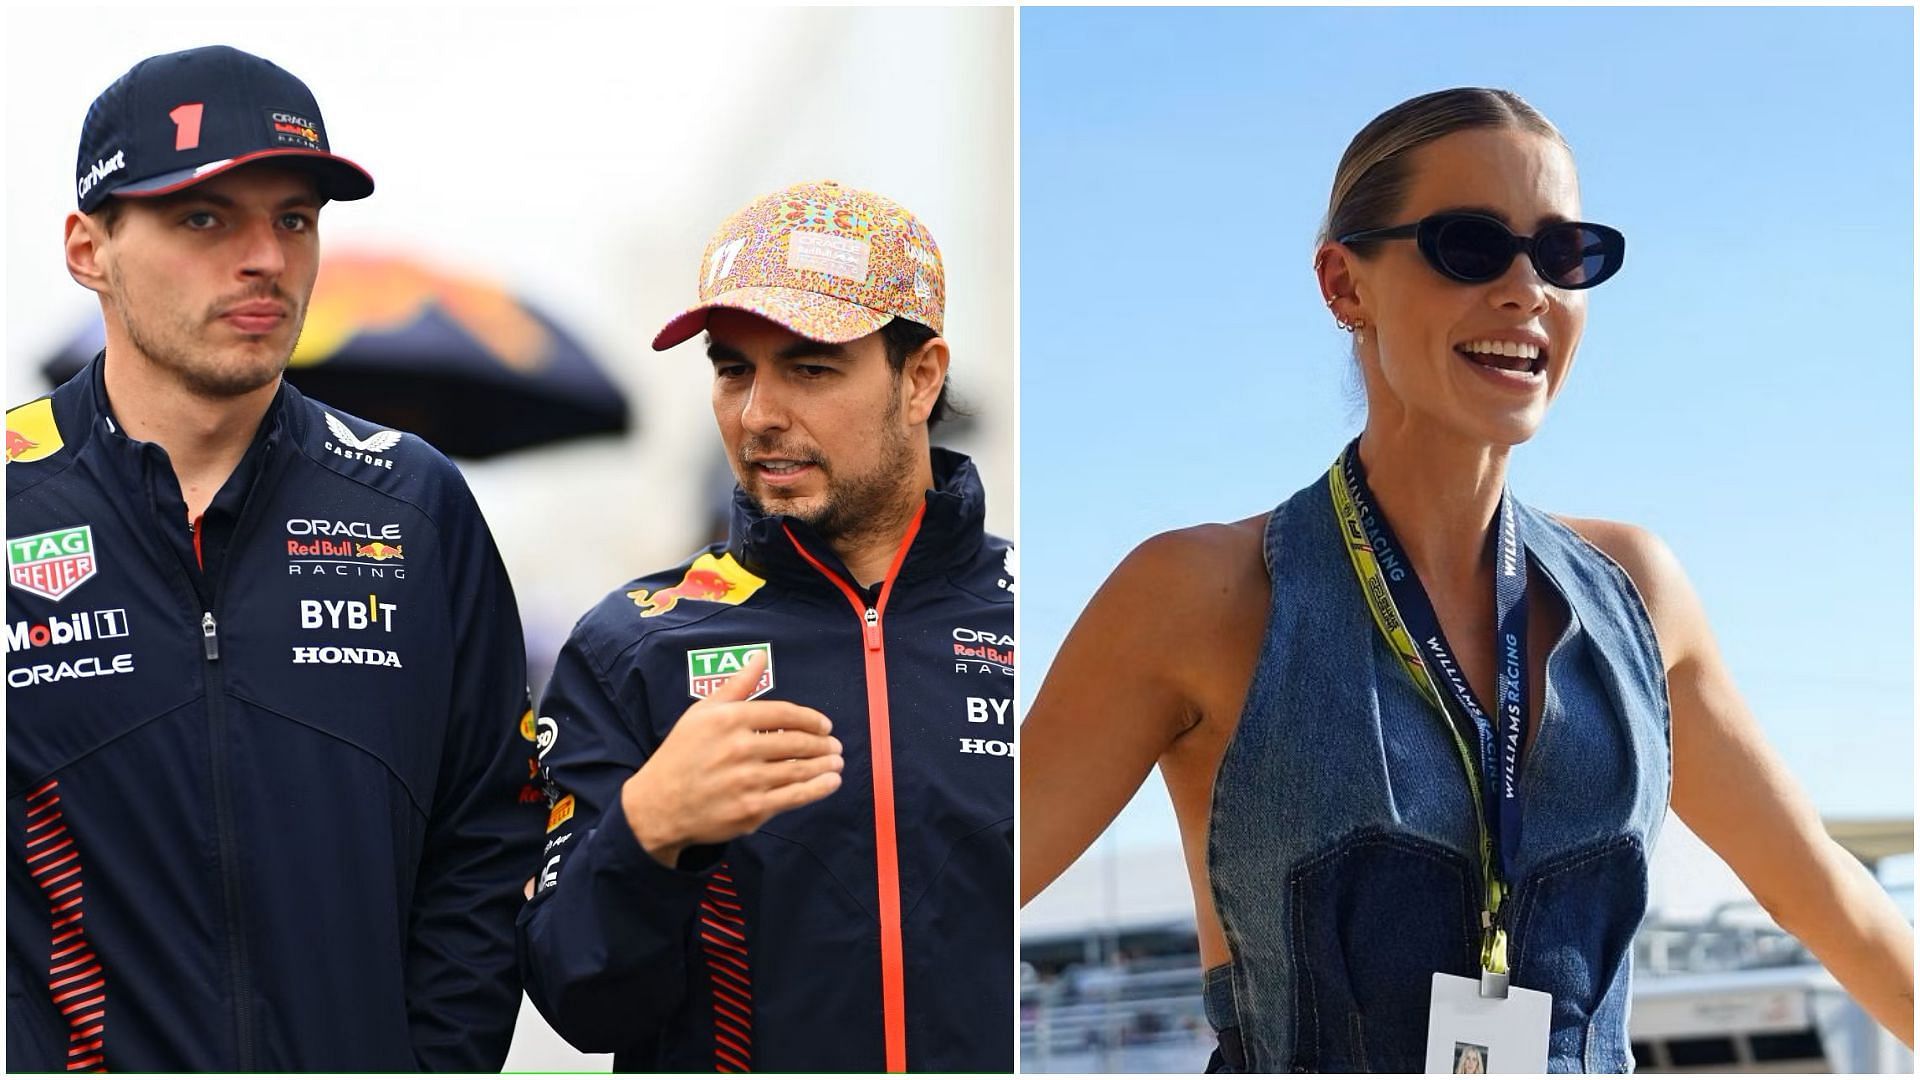 Max Verstappen and Sergio Perez in the paddock ahead of the 2023 F1 Canadian Grand Prix (R). Claire Holt during the 2022 F1 United States Grand Prix (L) (Collage via Sportskeeda)